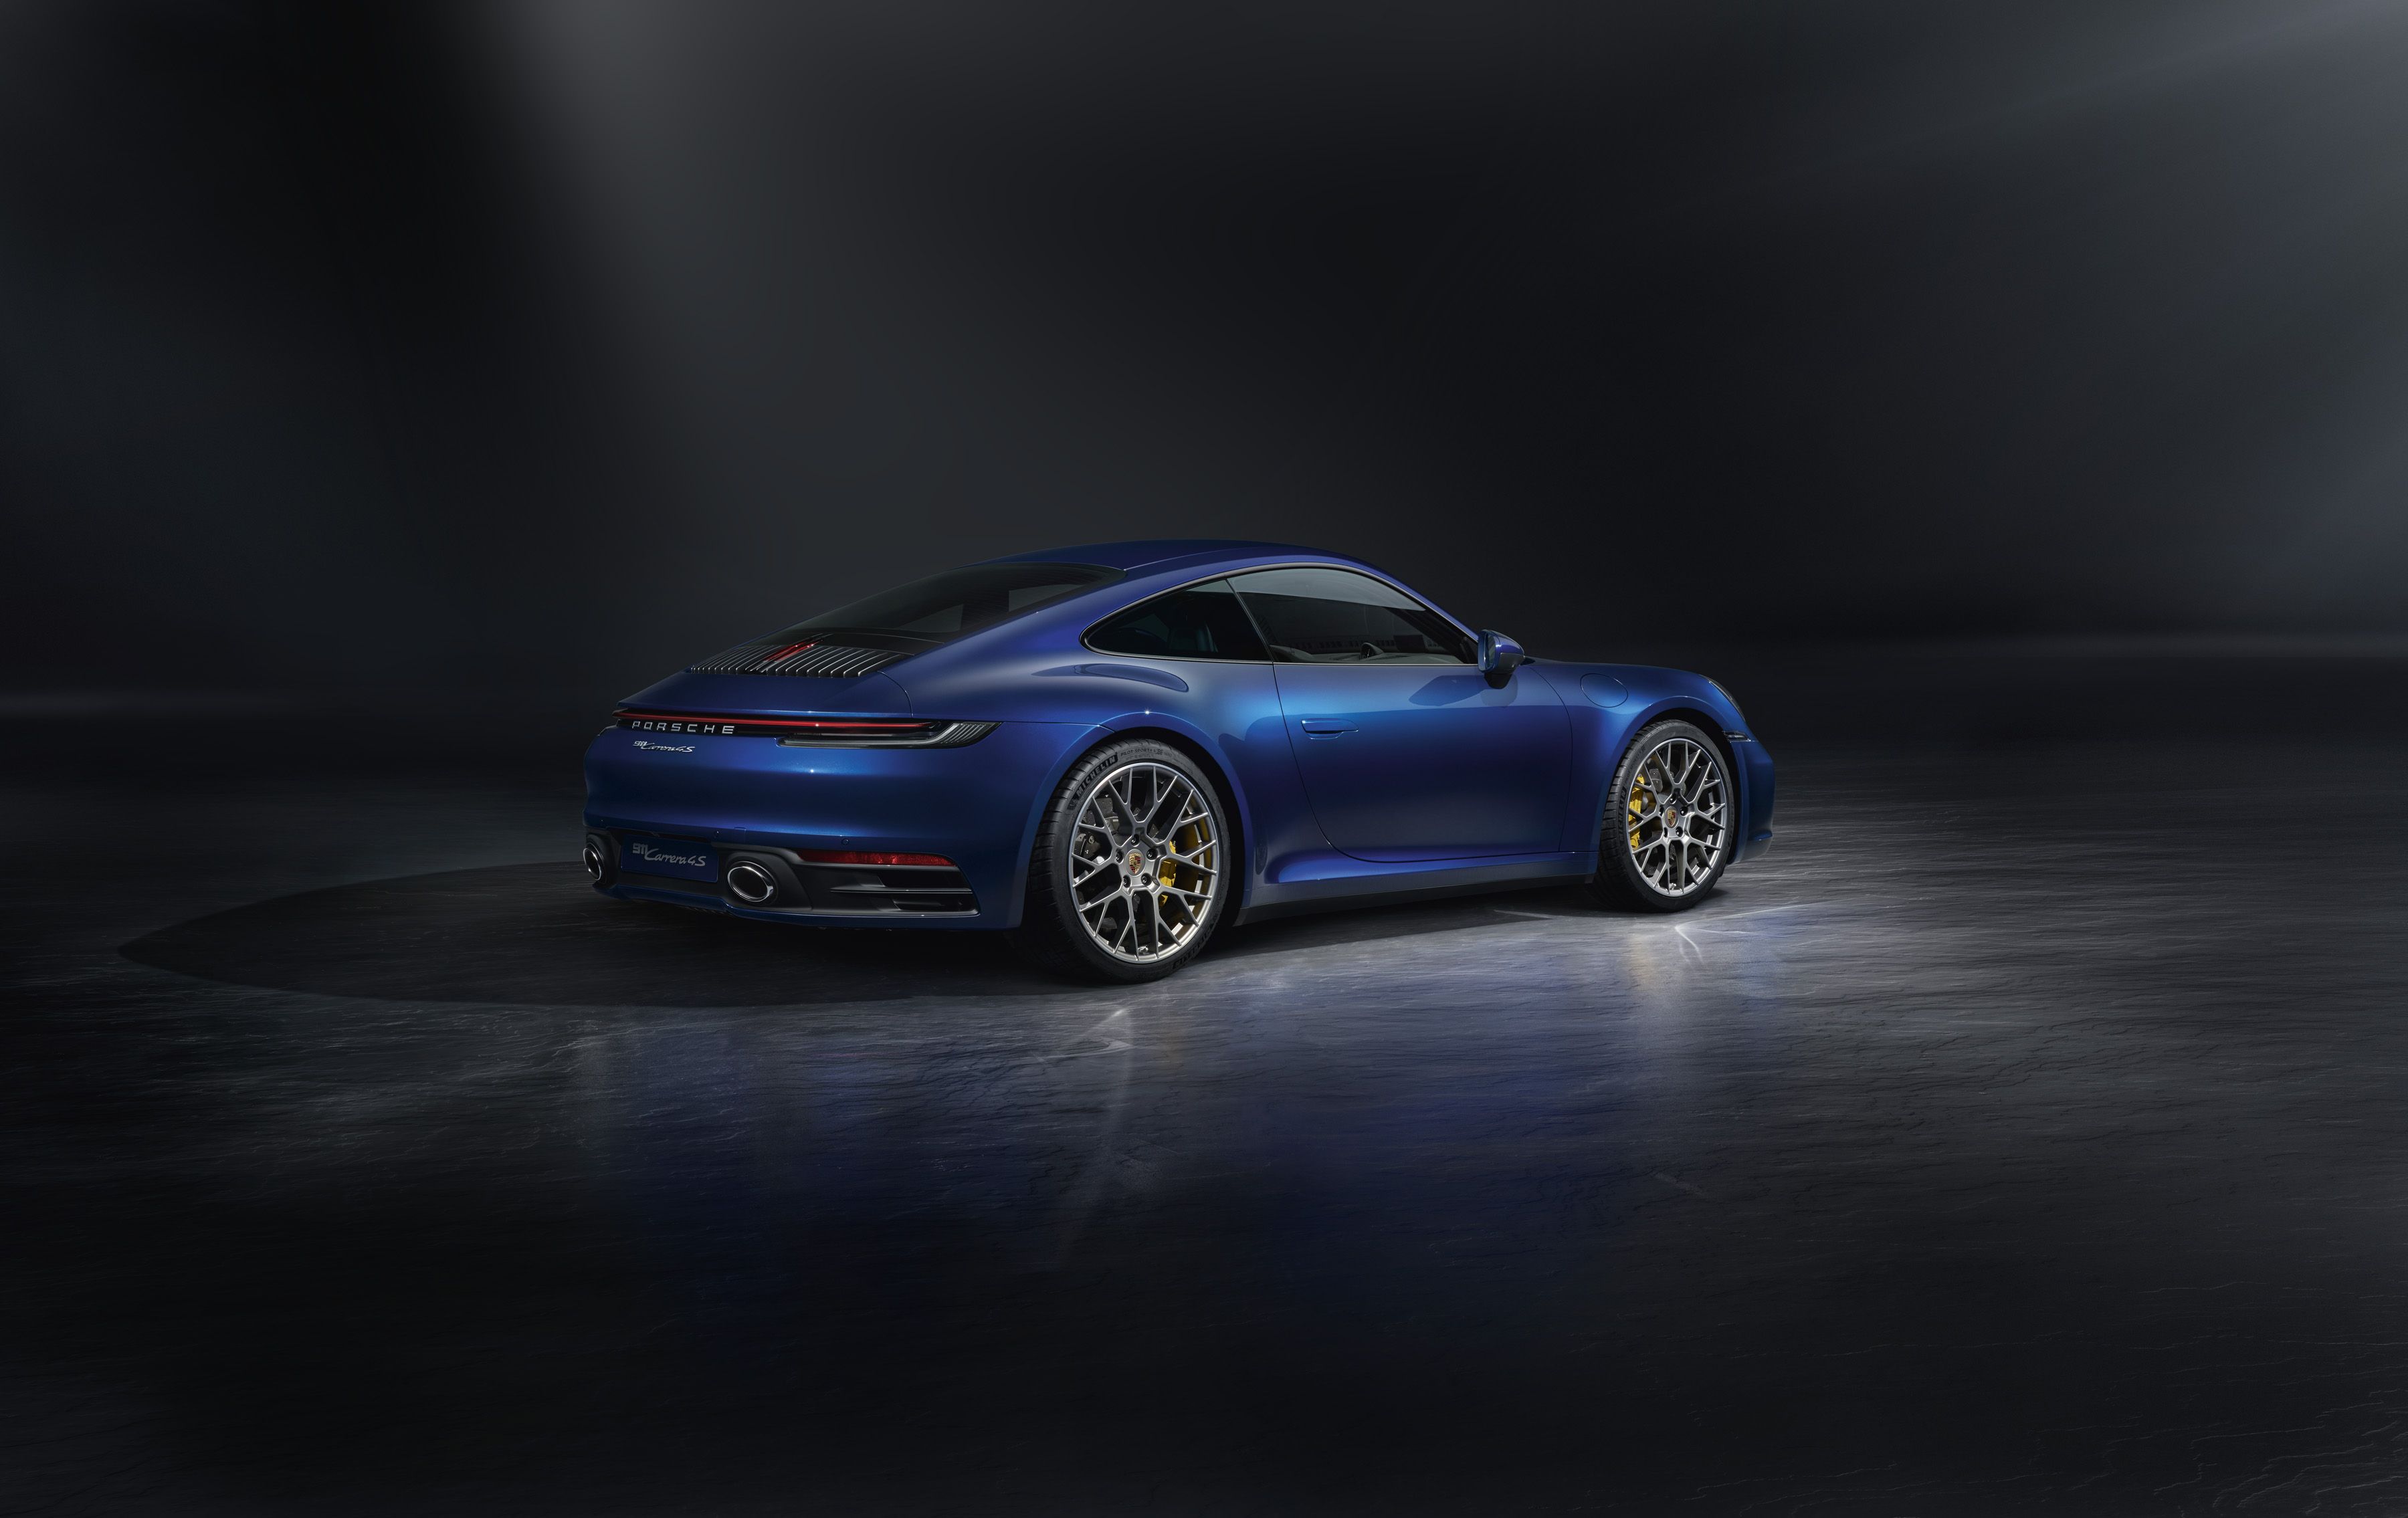 The new 2020 Porsche 911 Carrera S and 4S powerful, more